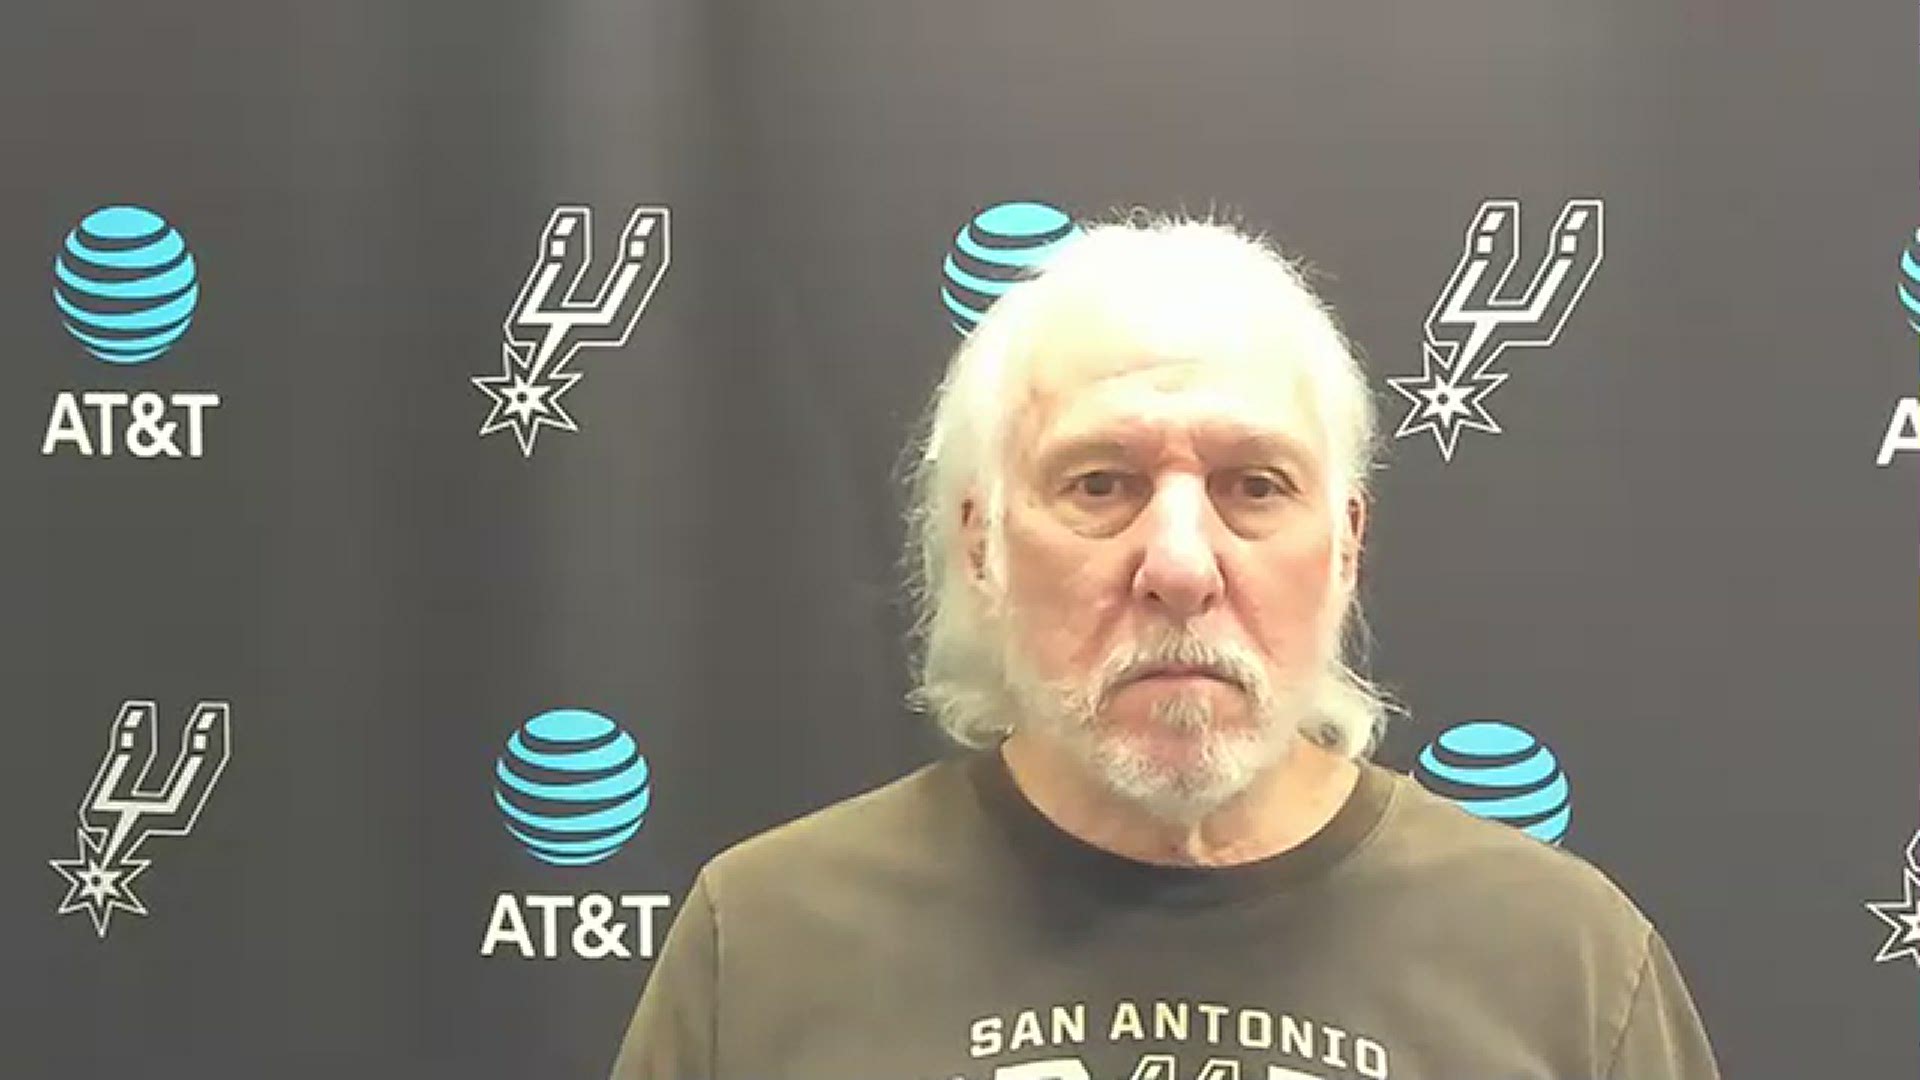 San Antonio Spurs head coach Gregg Popovich address reporters ahead of his team's game against the Indiana Pacers on April 19, 2021